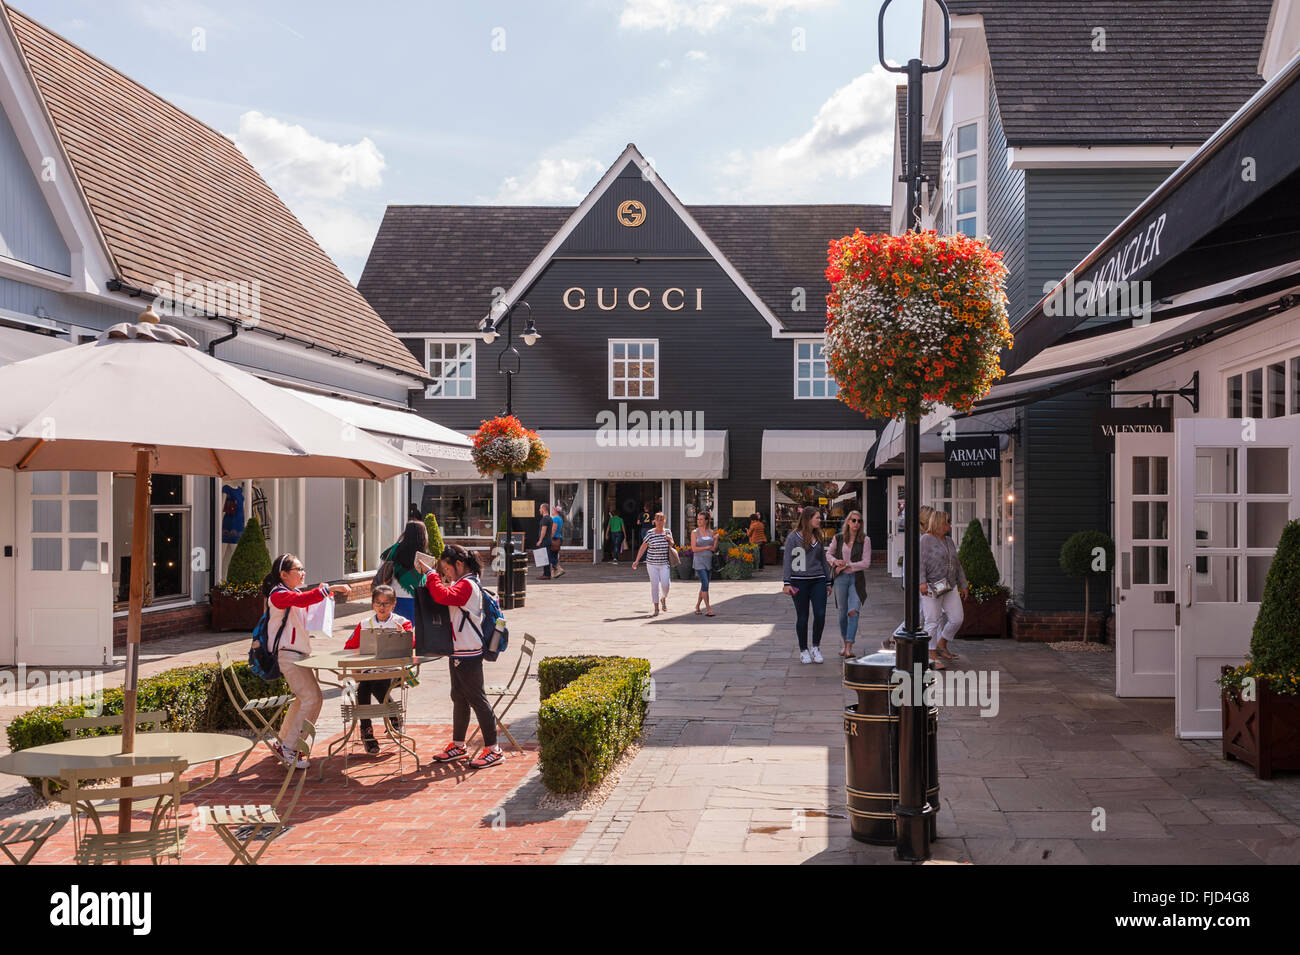 Gucci shop store at Bicester Village 